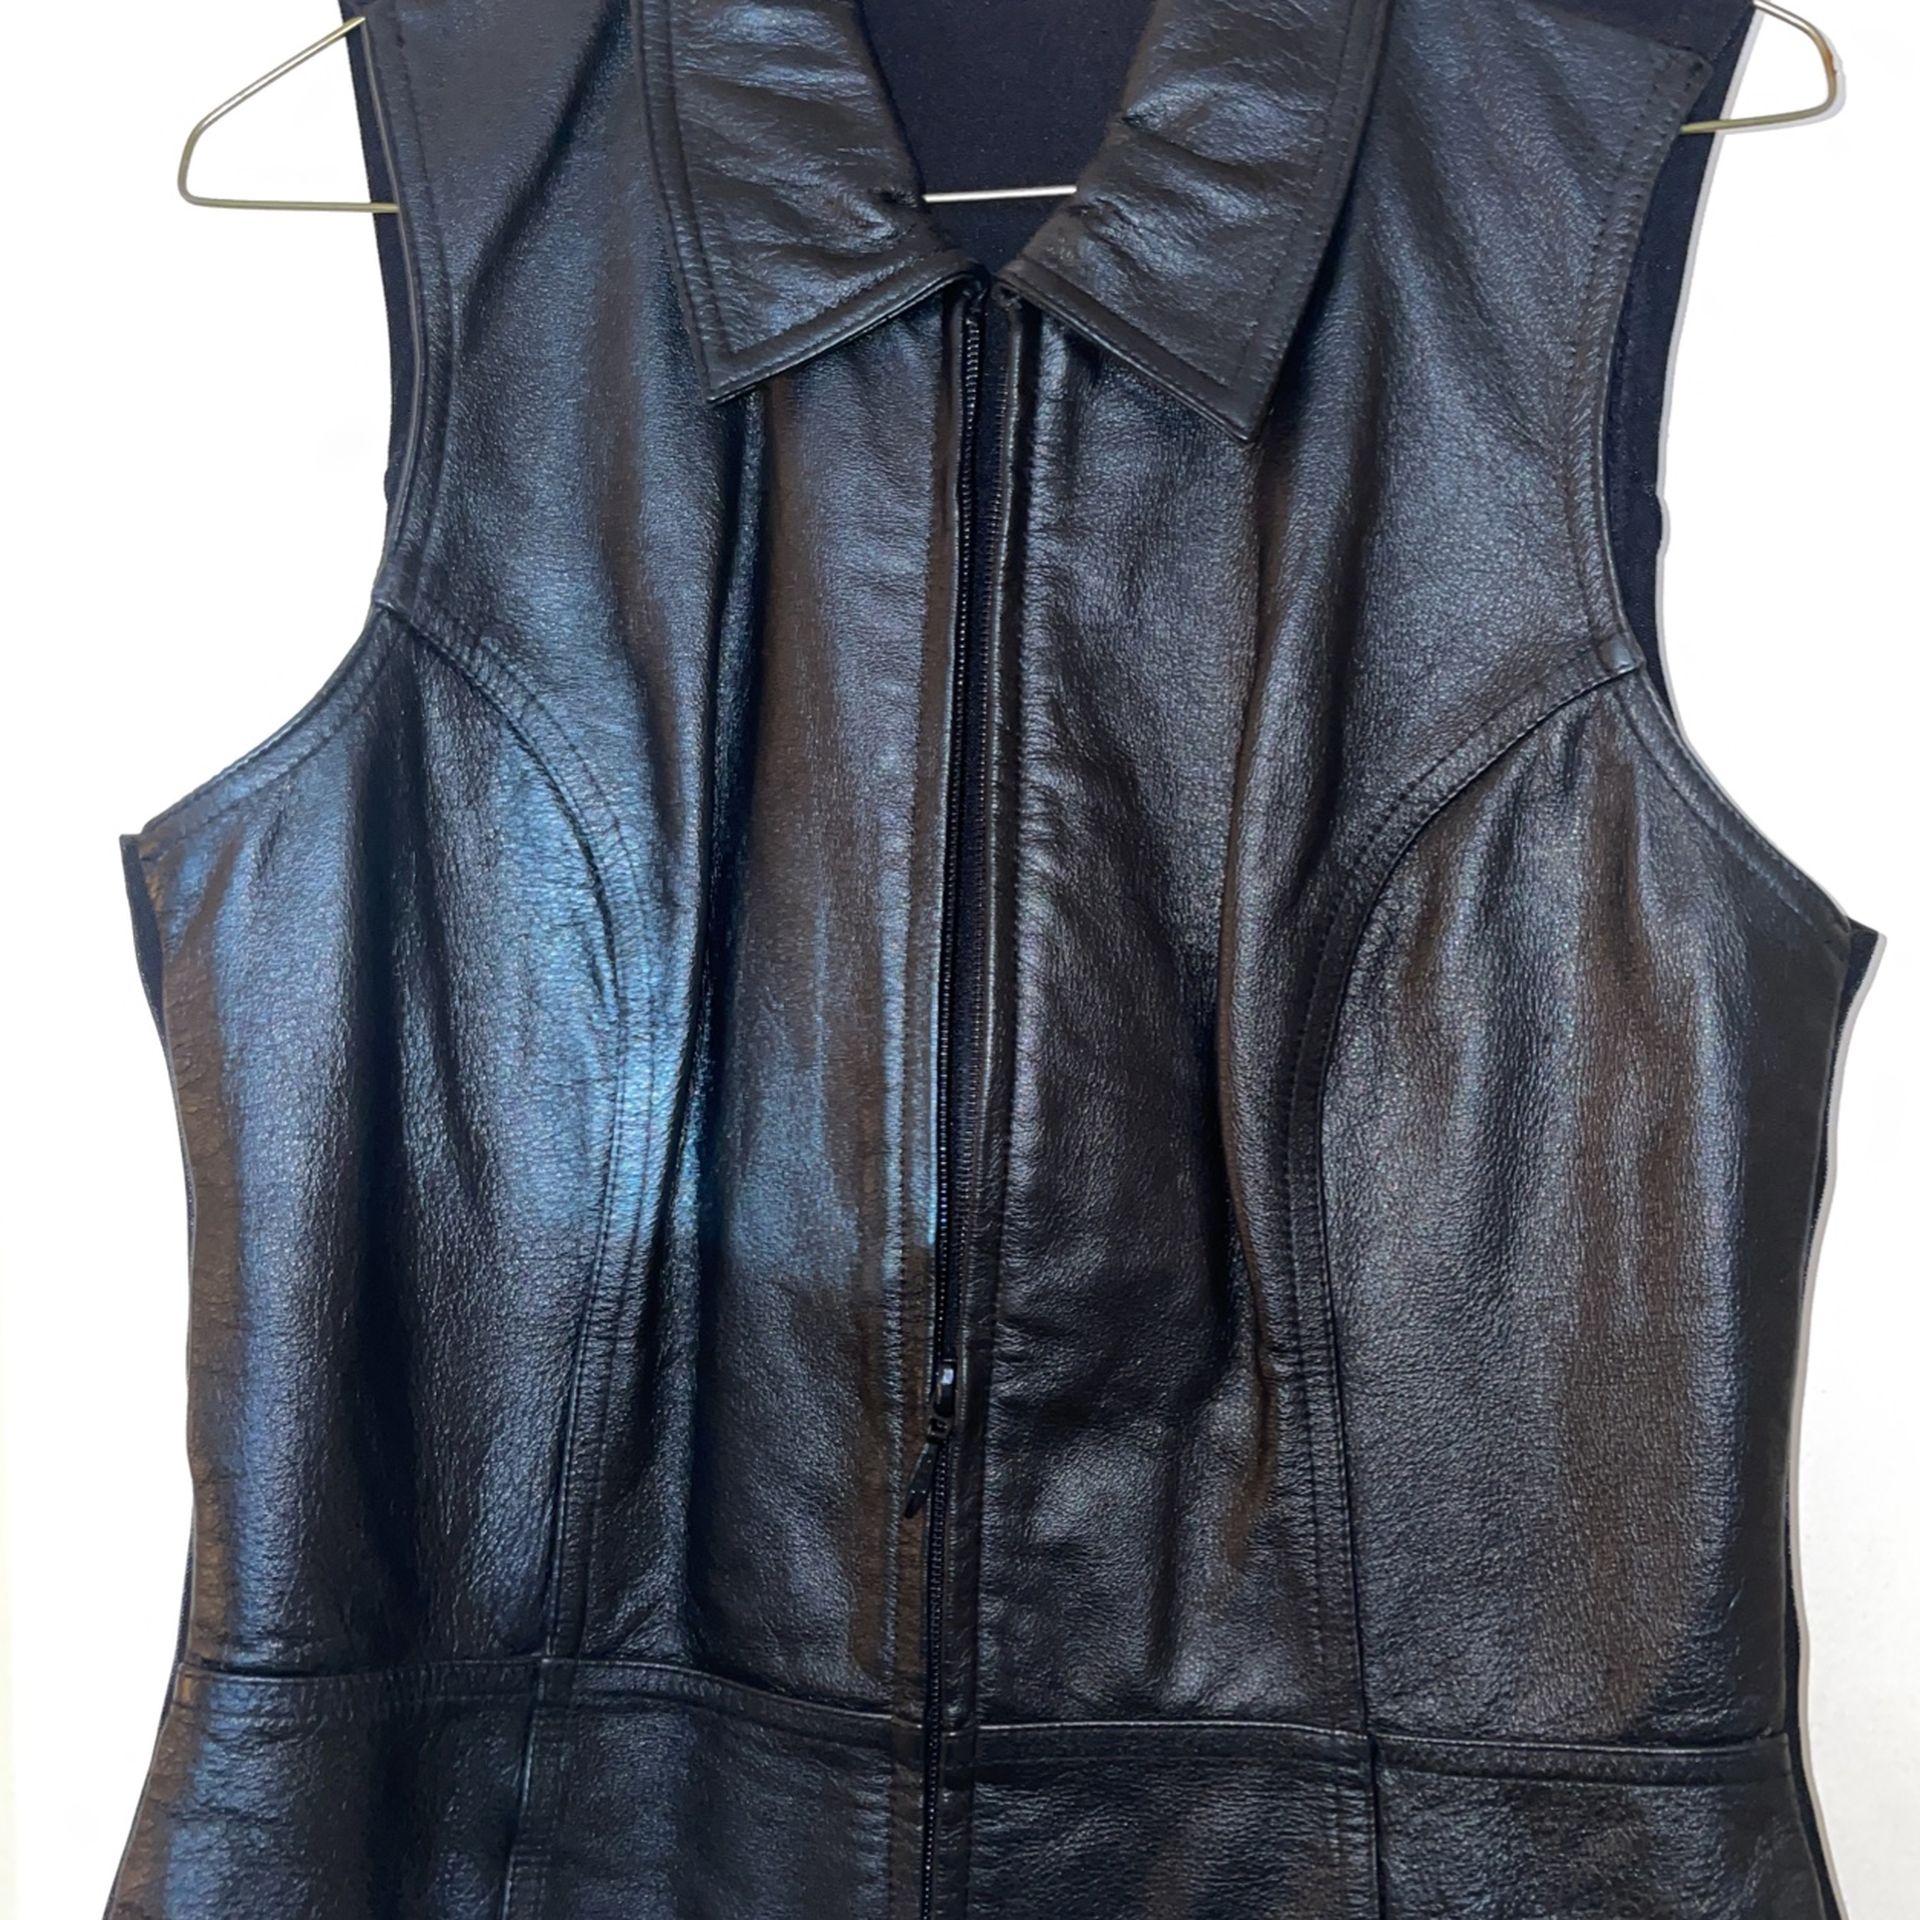 Wilsons Leather Vest In Black. Light weight. Back panel is Lycra and lining is nylon. 